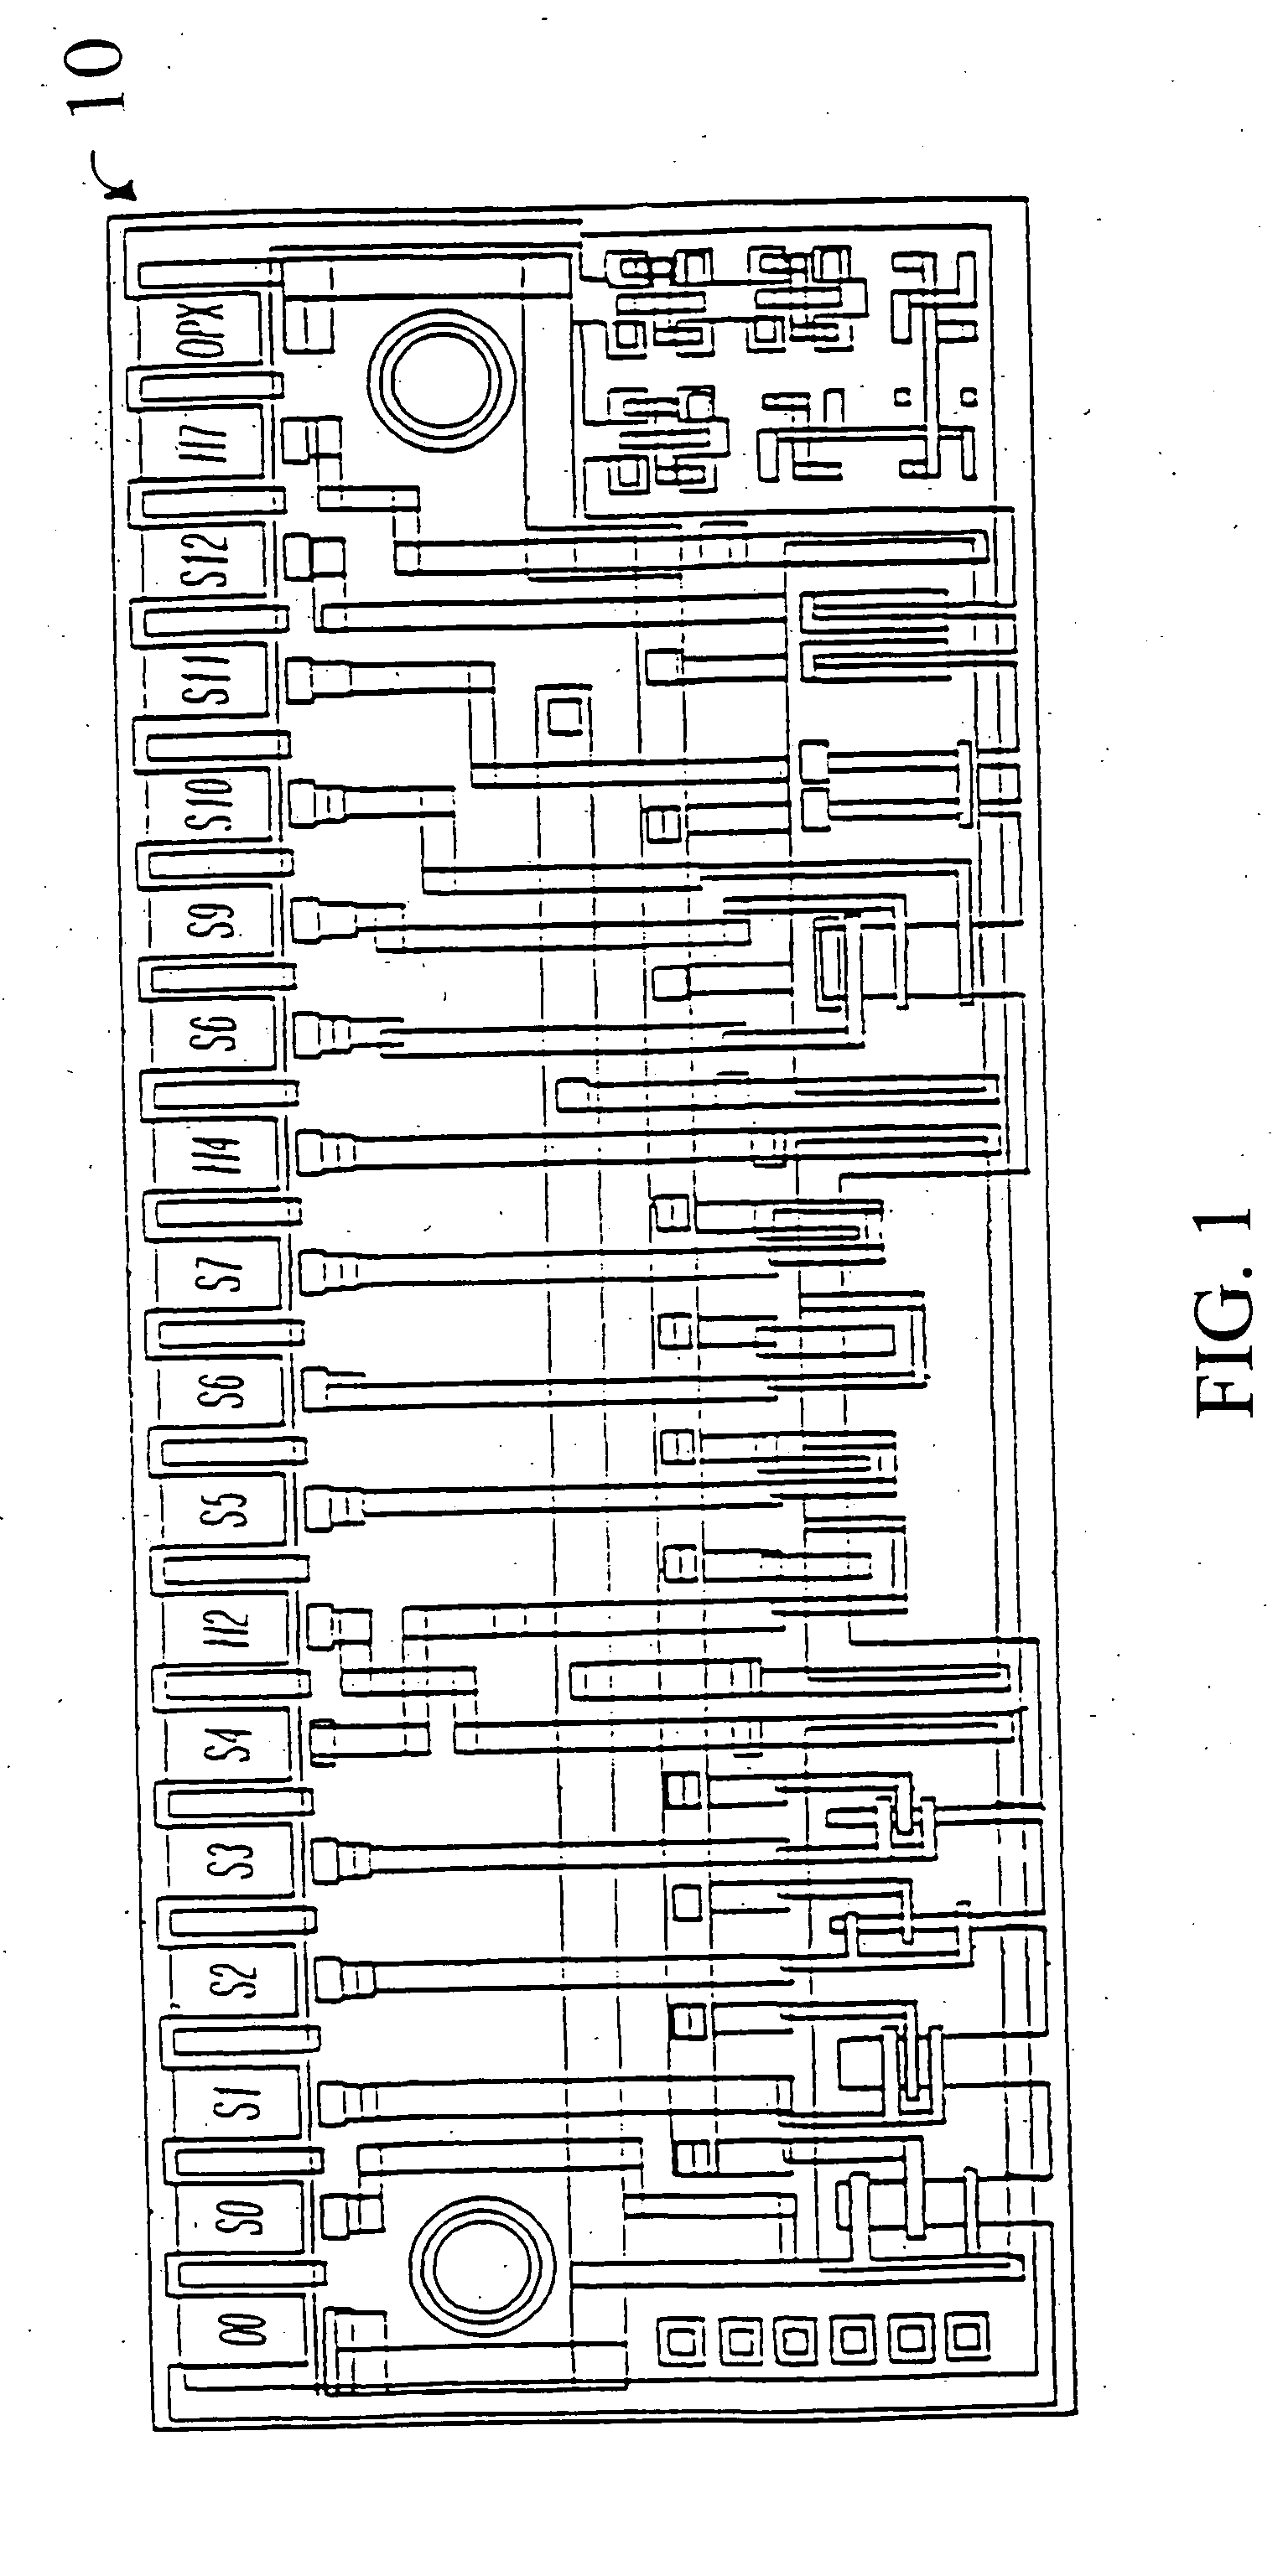 Method and apparatus for detecting humans and human remains